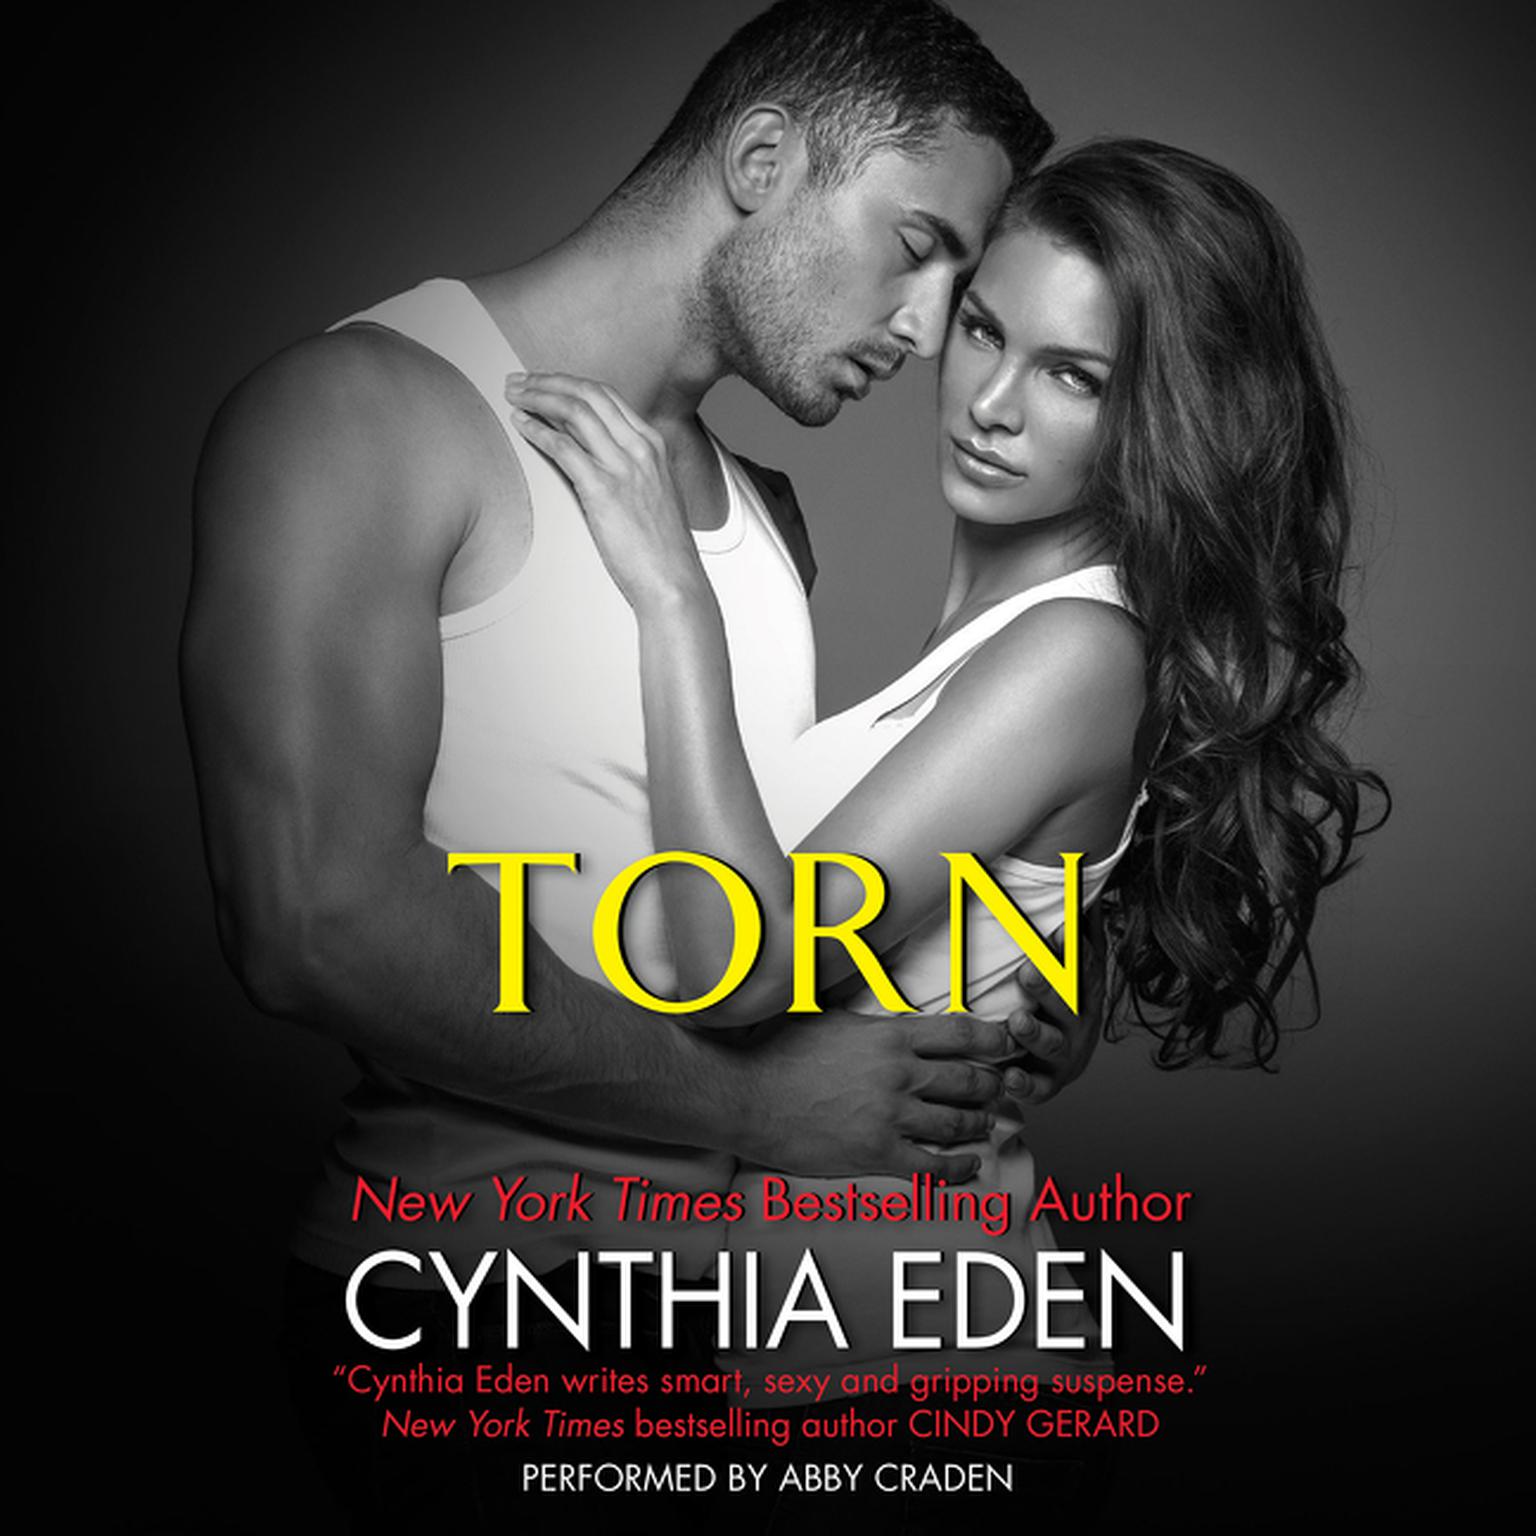 Torn: LOST Series #4 Audiobook, by Cynthia Eden